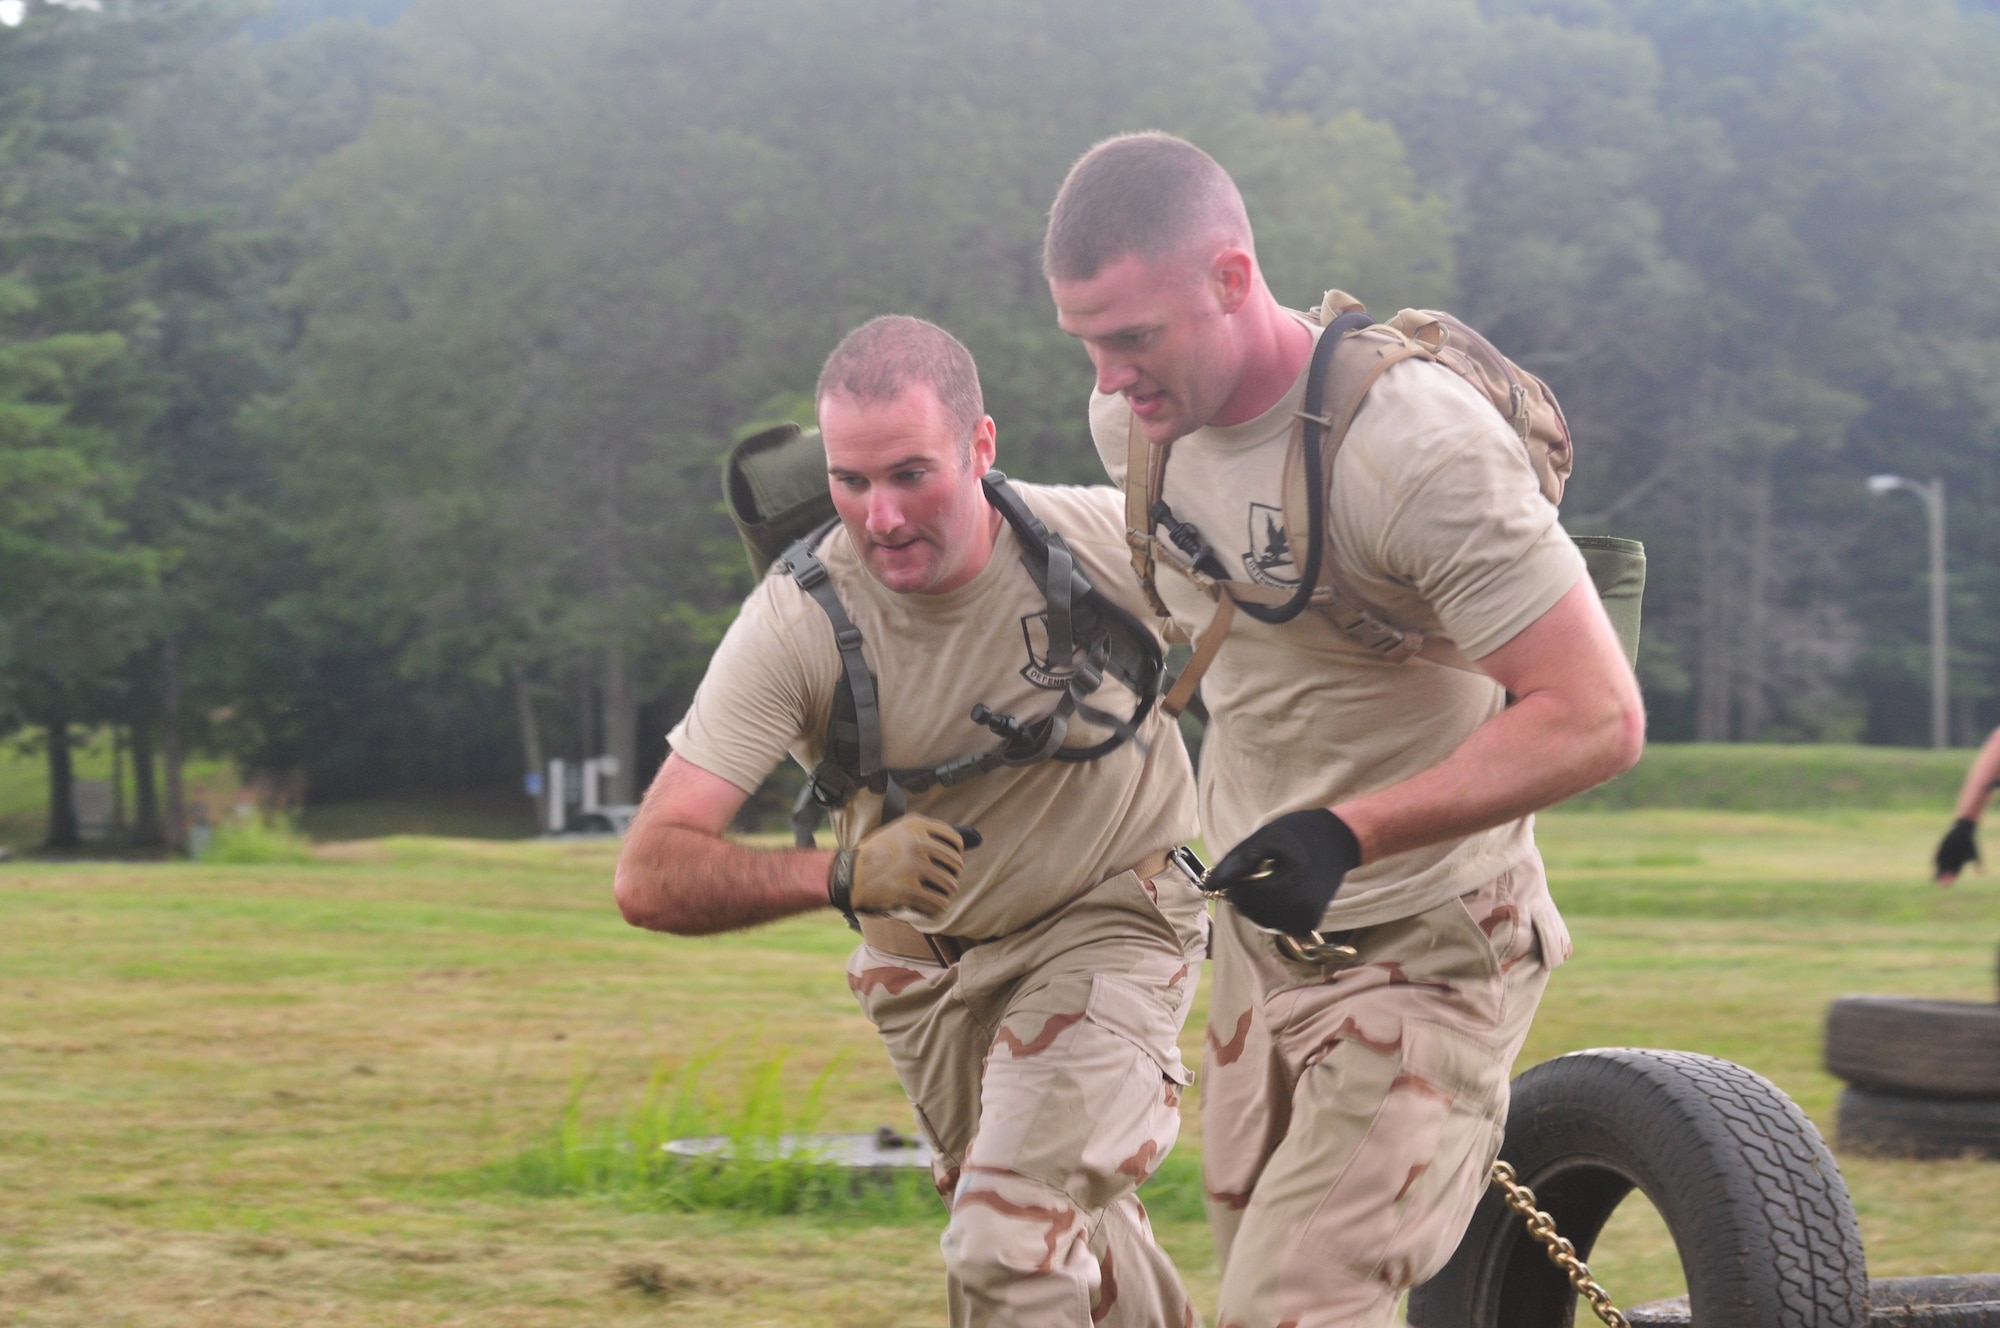 Staff Sgt. Ray Ryan (left) and Staff Sgt. Brian Davies, both from the 103rd Security Forces Squadron, pull more than just their own weight as members of the Connecticut Air National Guard Emergency Service Team during a Connecticut SWAT Challenge event at the West Hartford MDC Reservoir Aug. 25, 2011. The Guard team took 22nd place overall in the annual competition. (U.S. Air Force photo by Tech. Sgt. Erin McNamara)